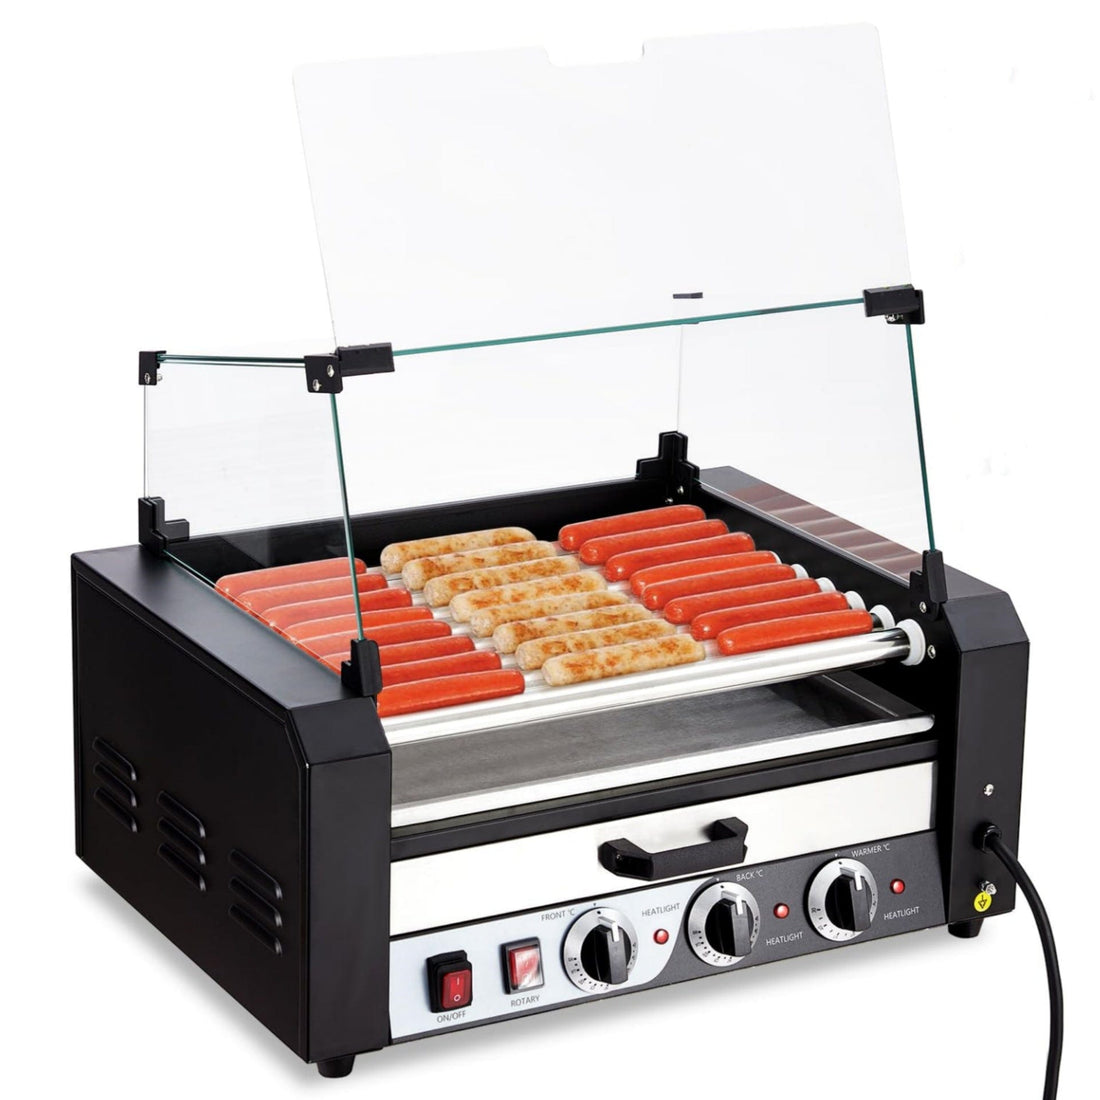 GARVEE Hot Dog Roller 9 Rollers 24 Hot Dogs Capacity 1650W Stainless Sausage Grill Cooker Machine